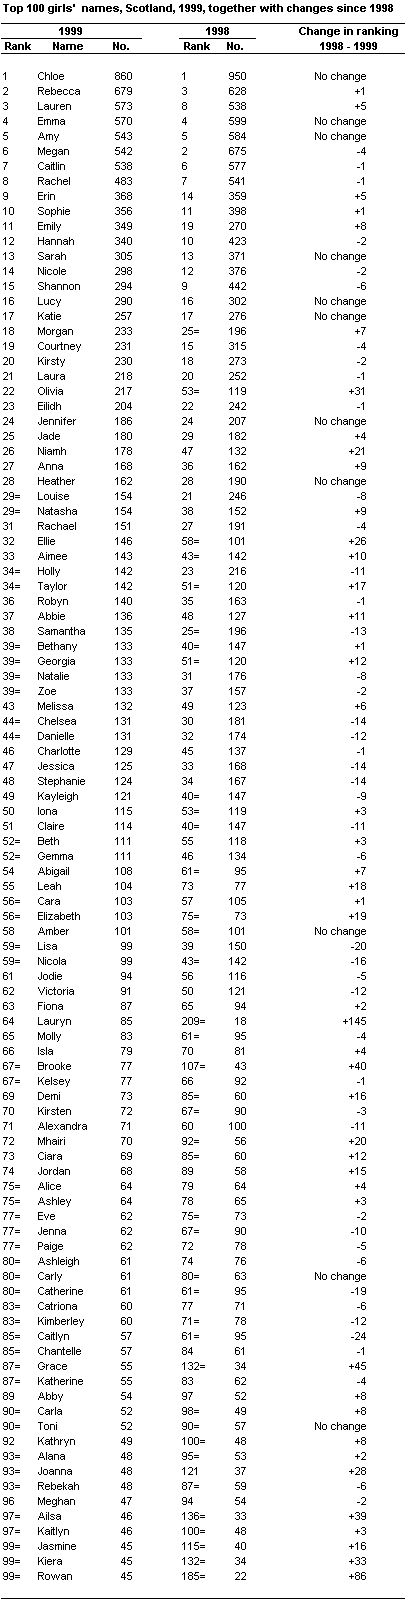 Top 100 girls' names, Scotland,1999 together with changes since 1998 